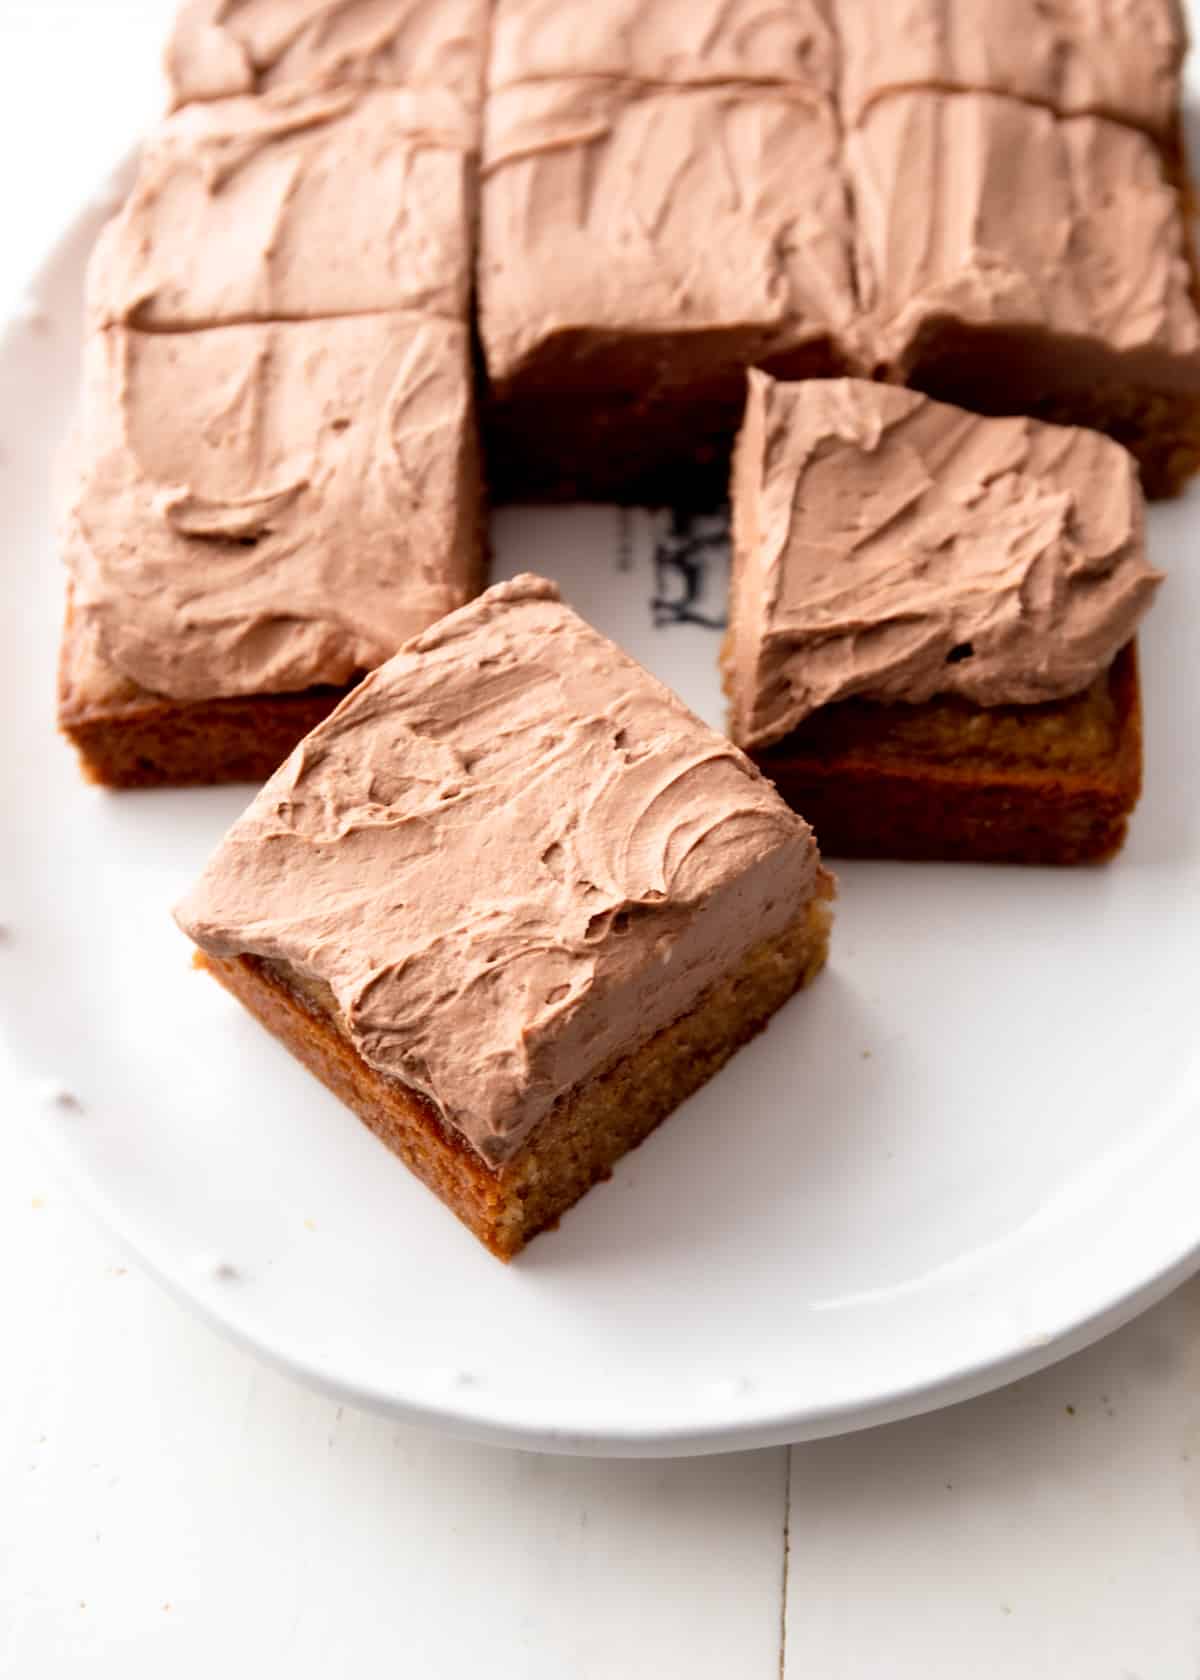 a square cake with chocolate frosting cut into square slices on a white plate